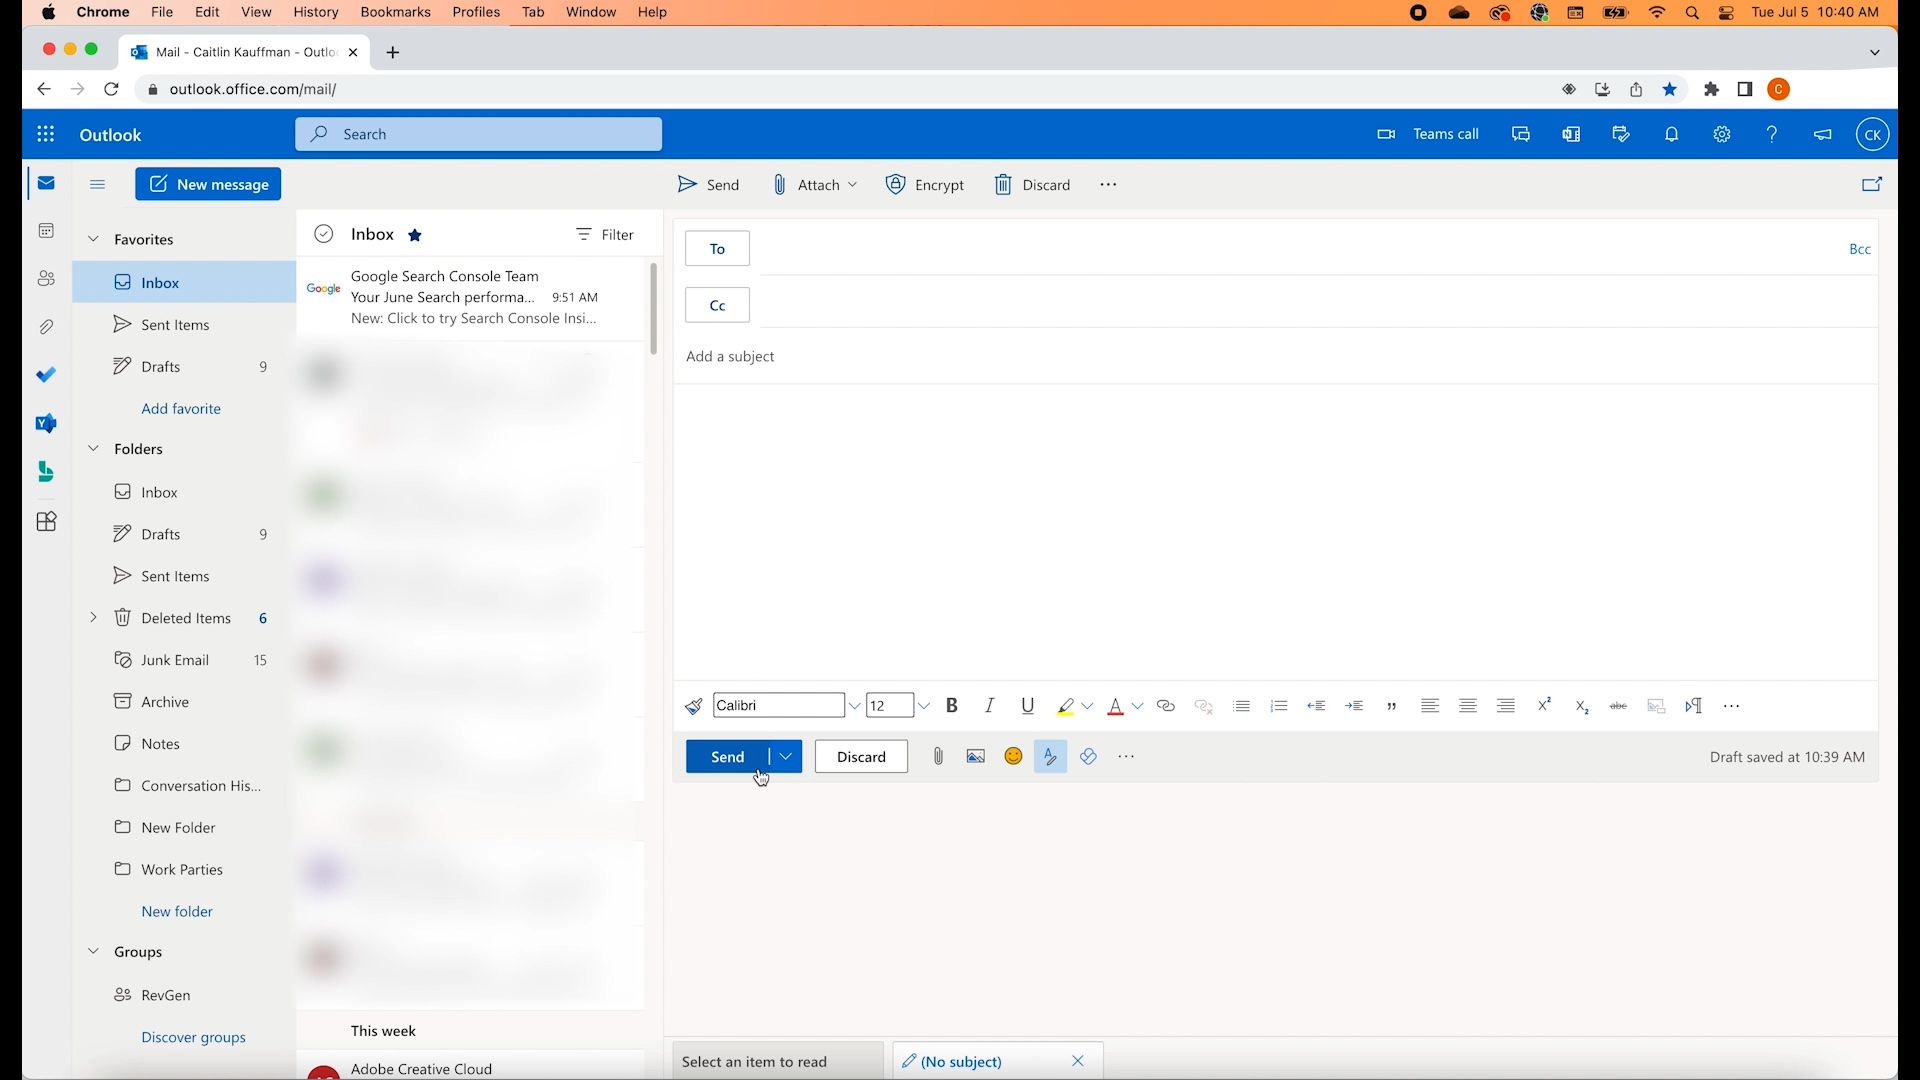 How to Send a Message in Outlook